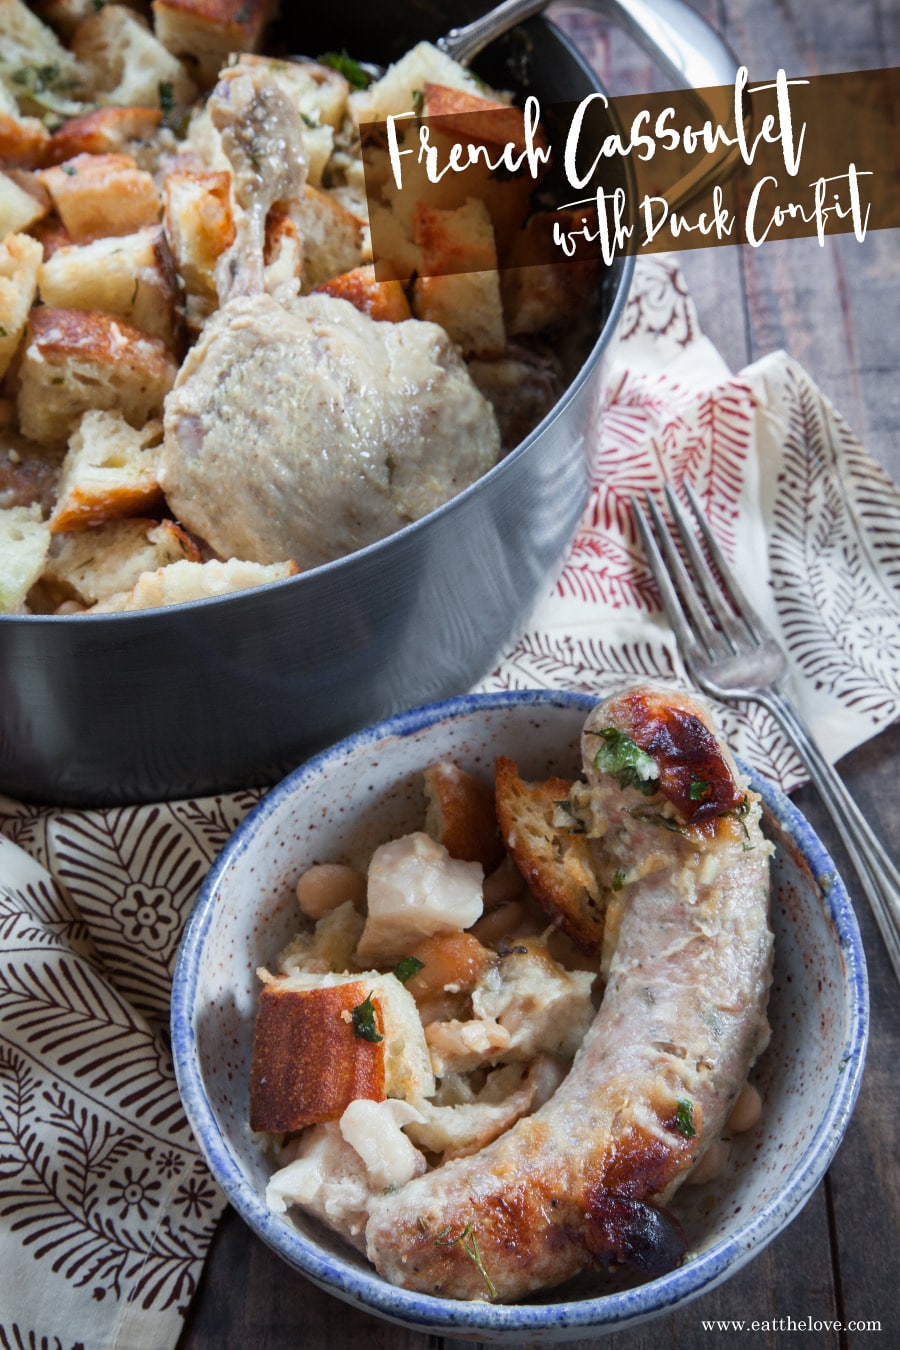 French Cassoulet with Duck Confit. Recipe and photo by Irvin Lin of Eat the Love.